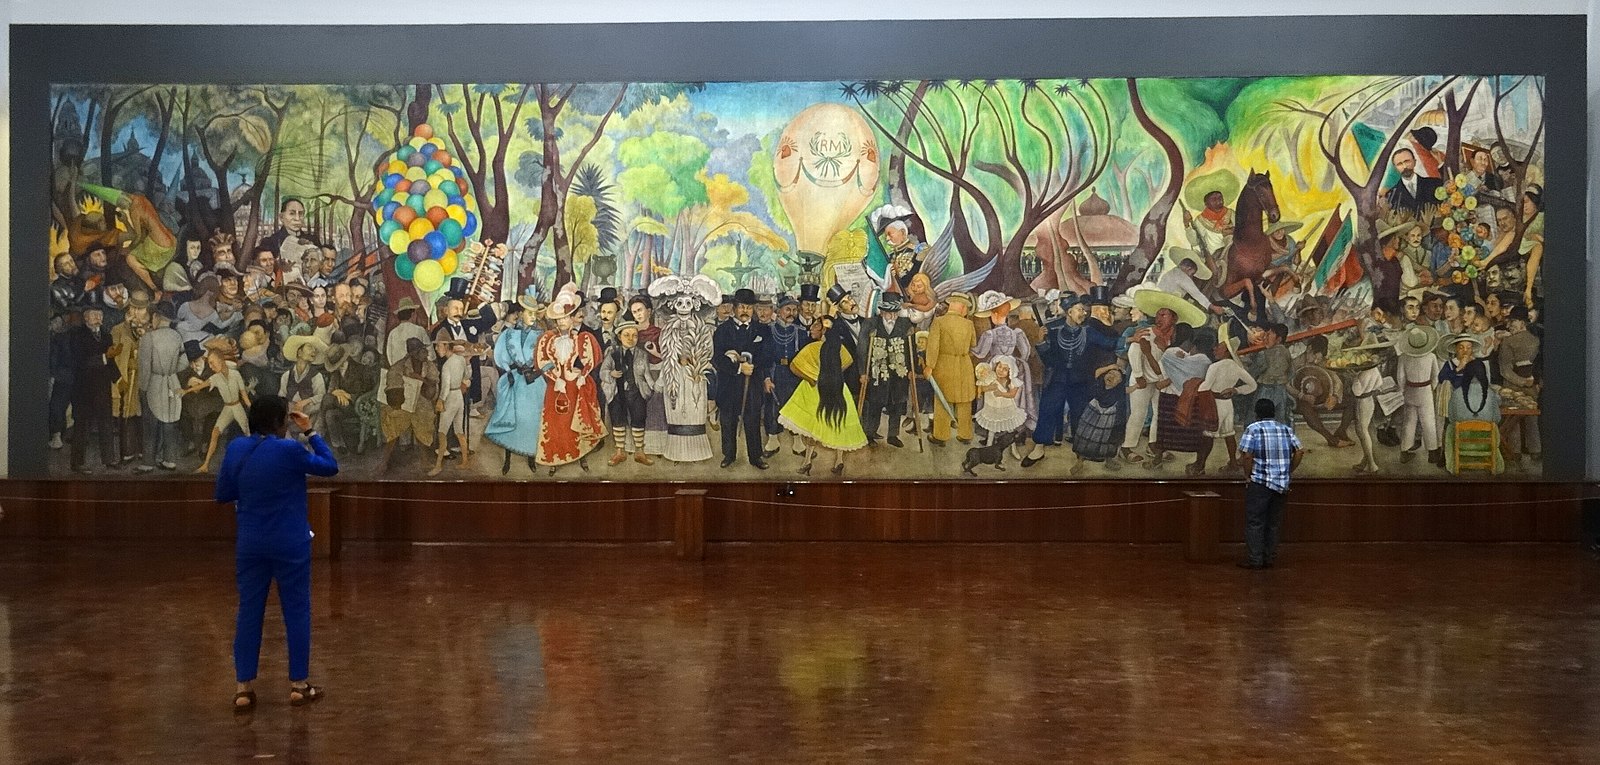 A large mural of an outdoor party scene with trees